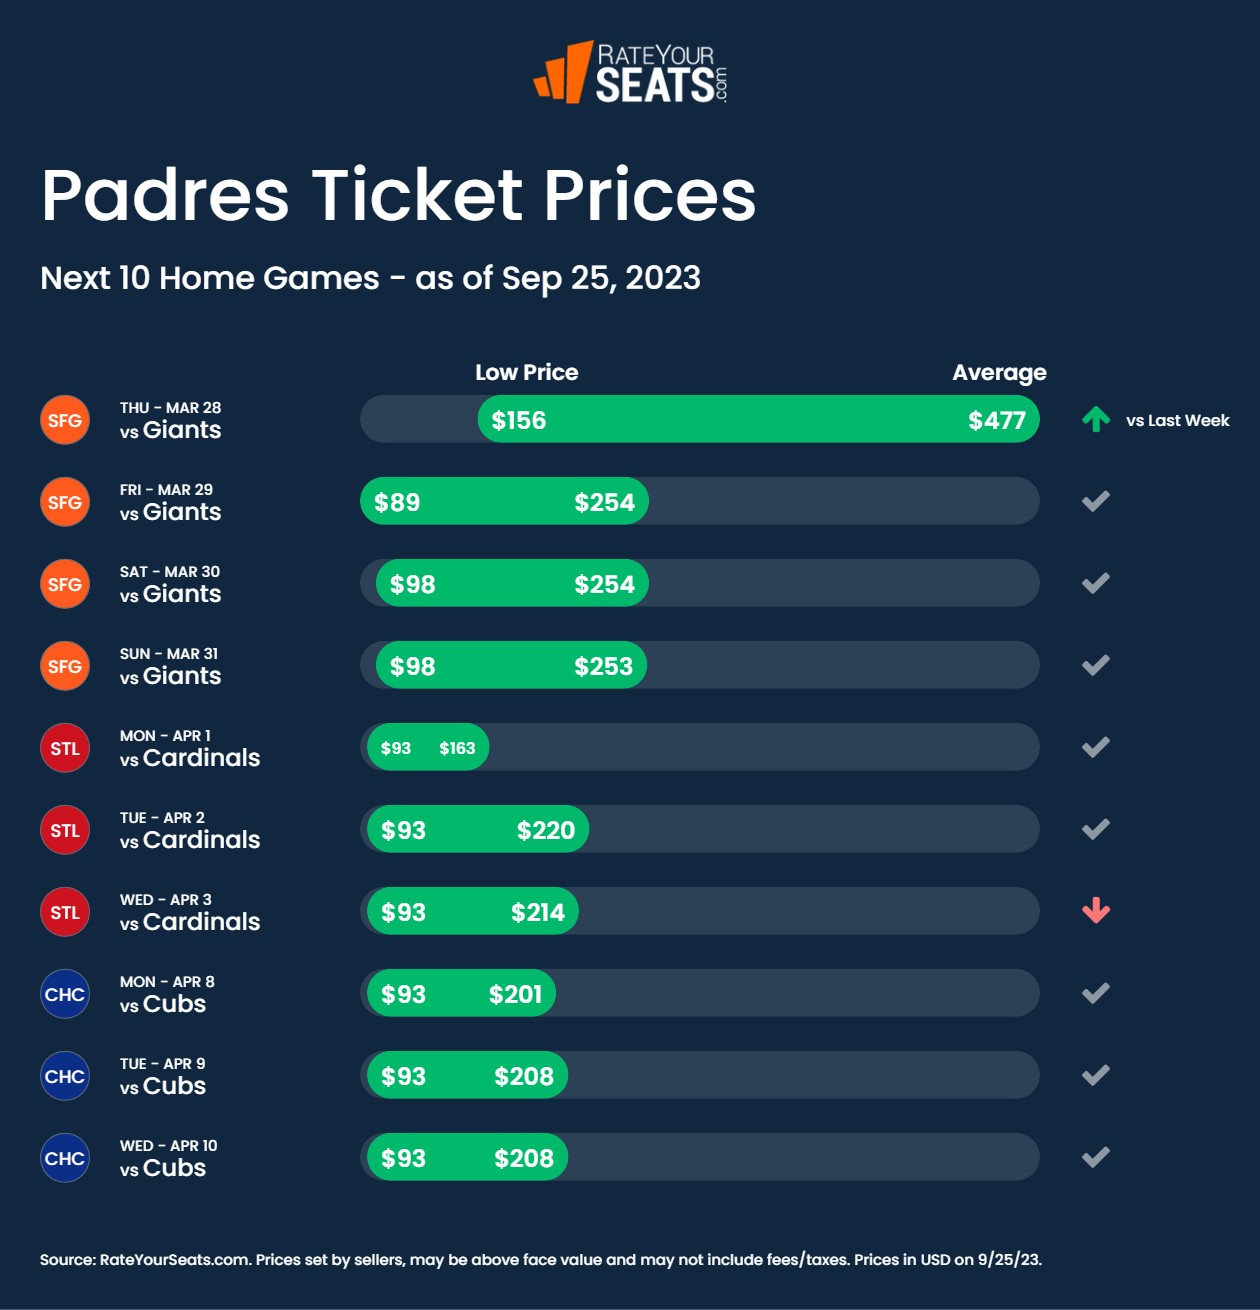 Padres tickets pricing week of September 25 2023